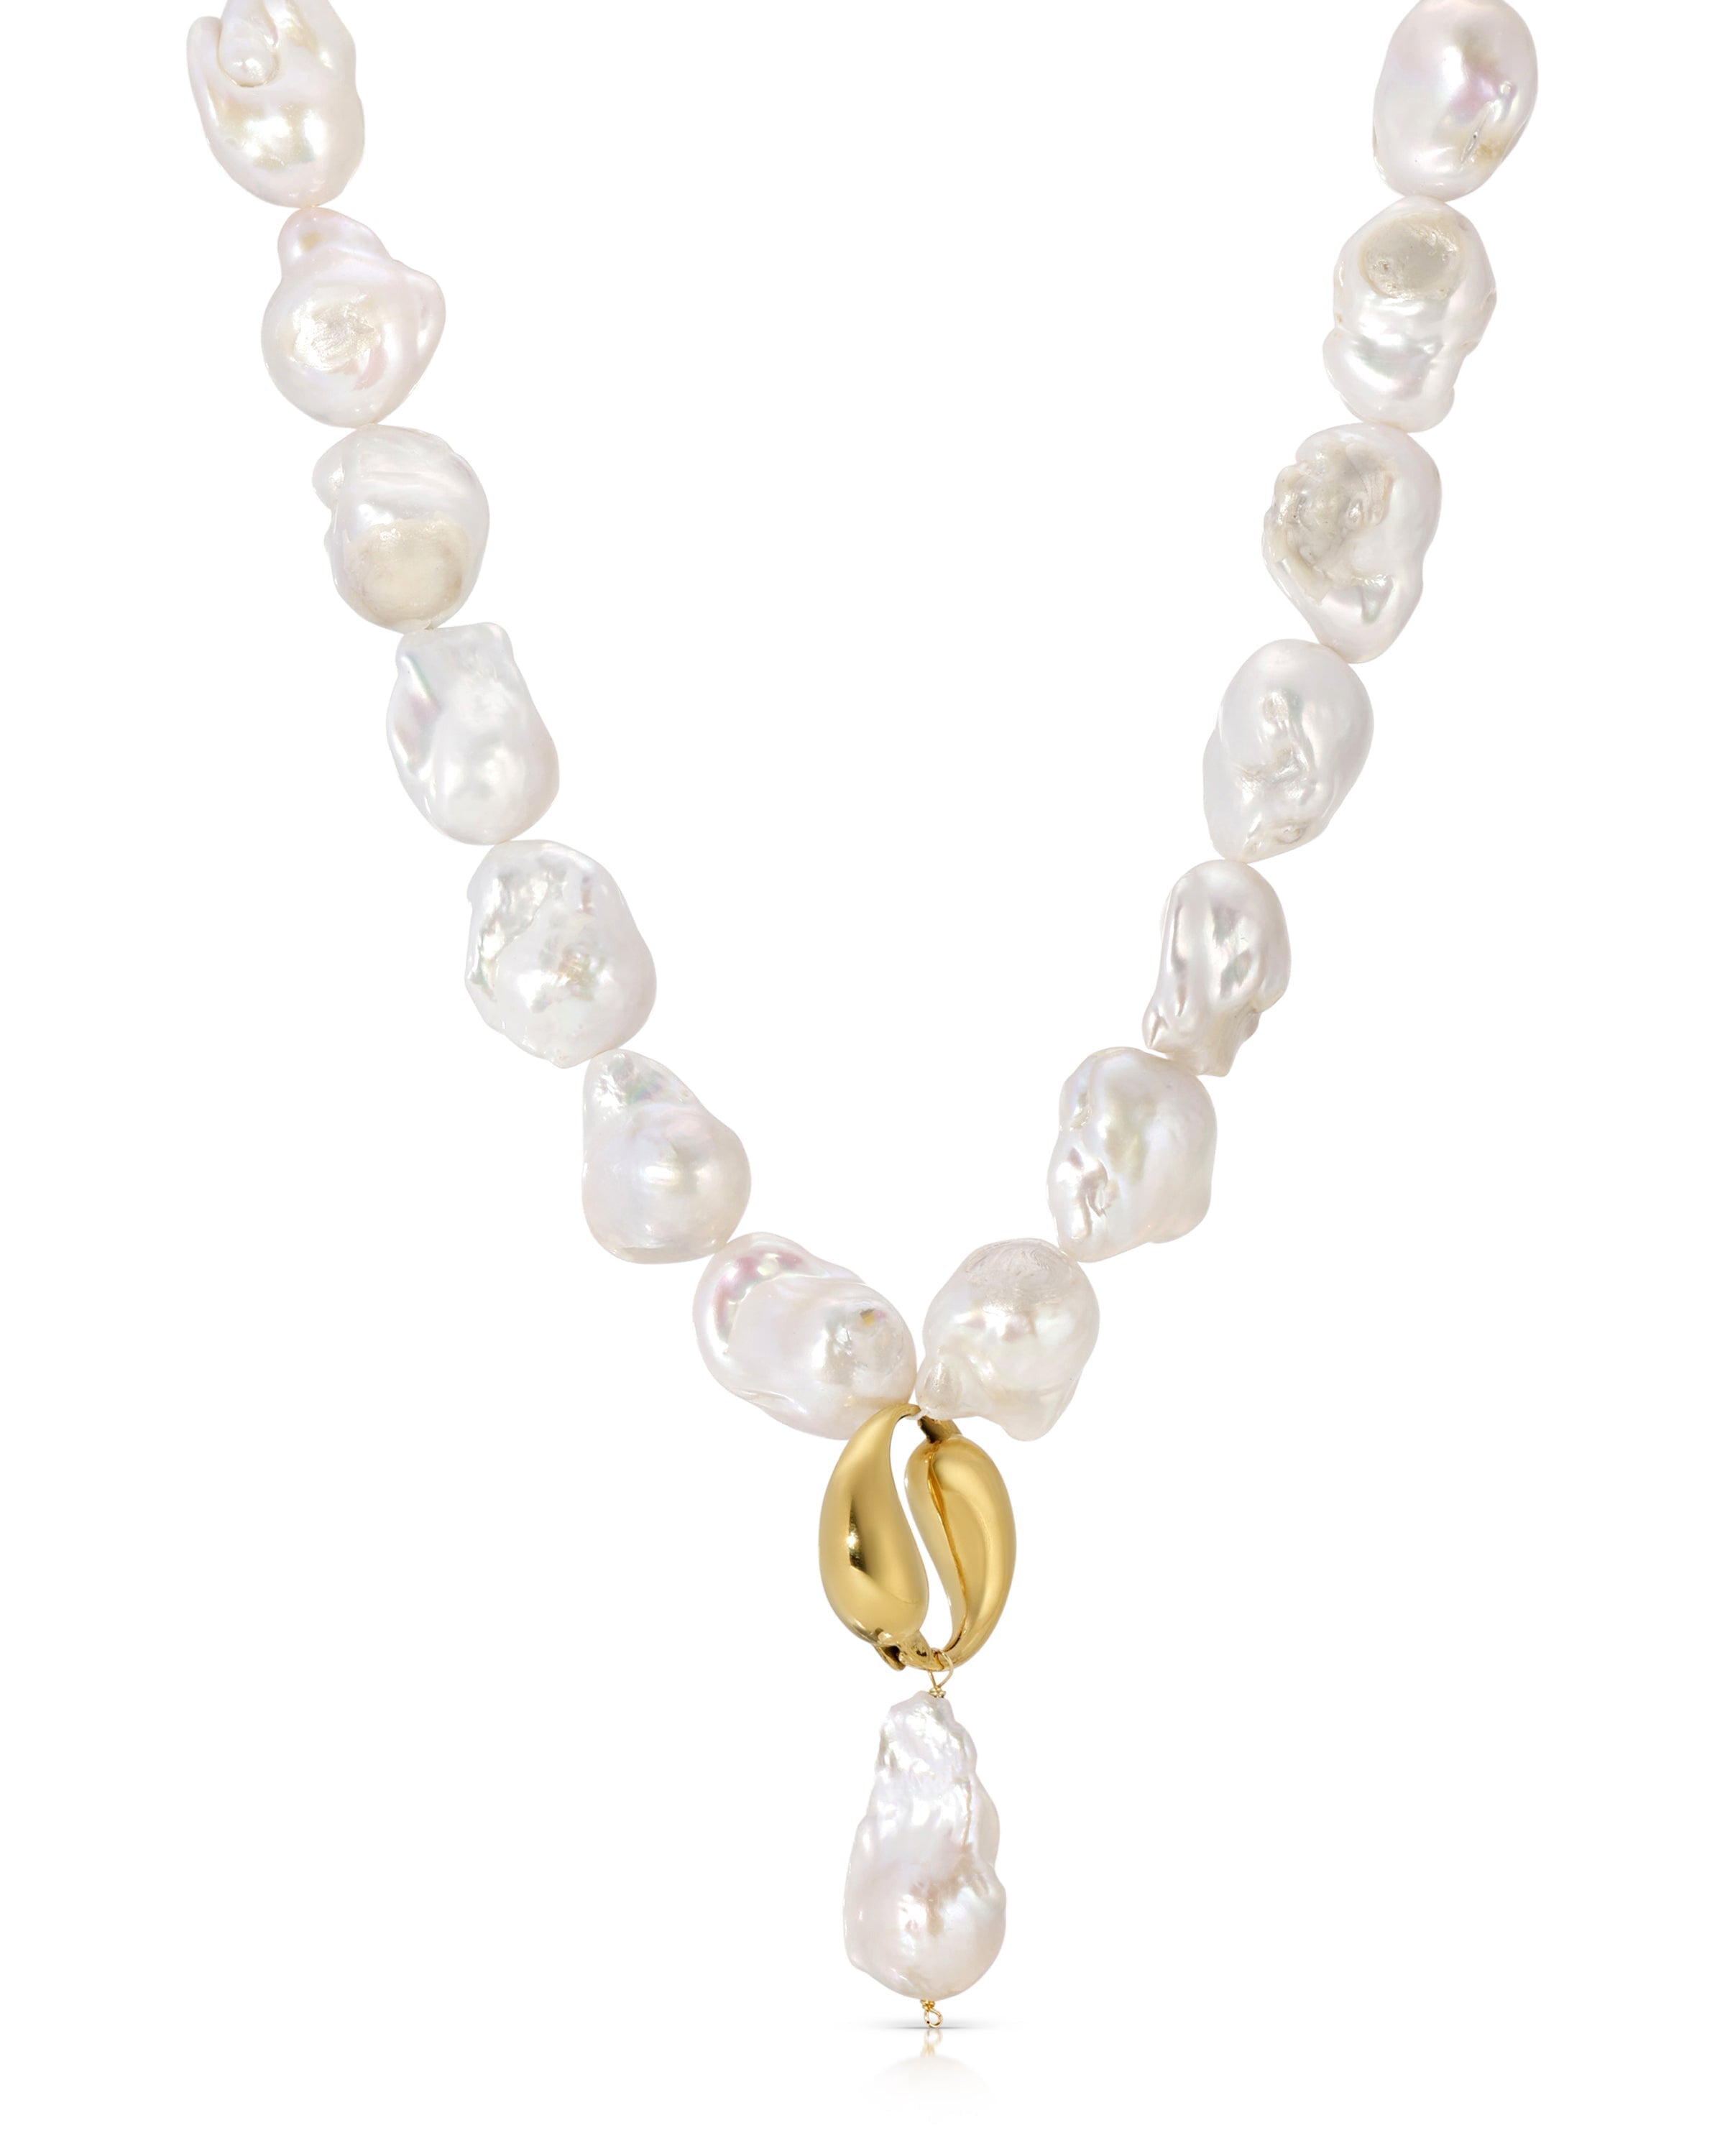 Spiral Pearl Necklace